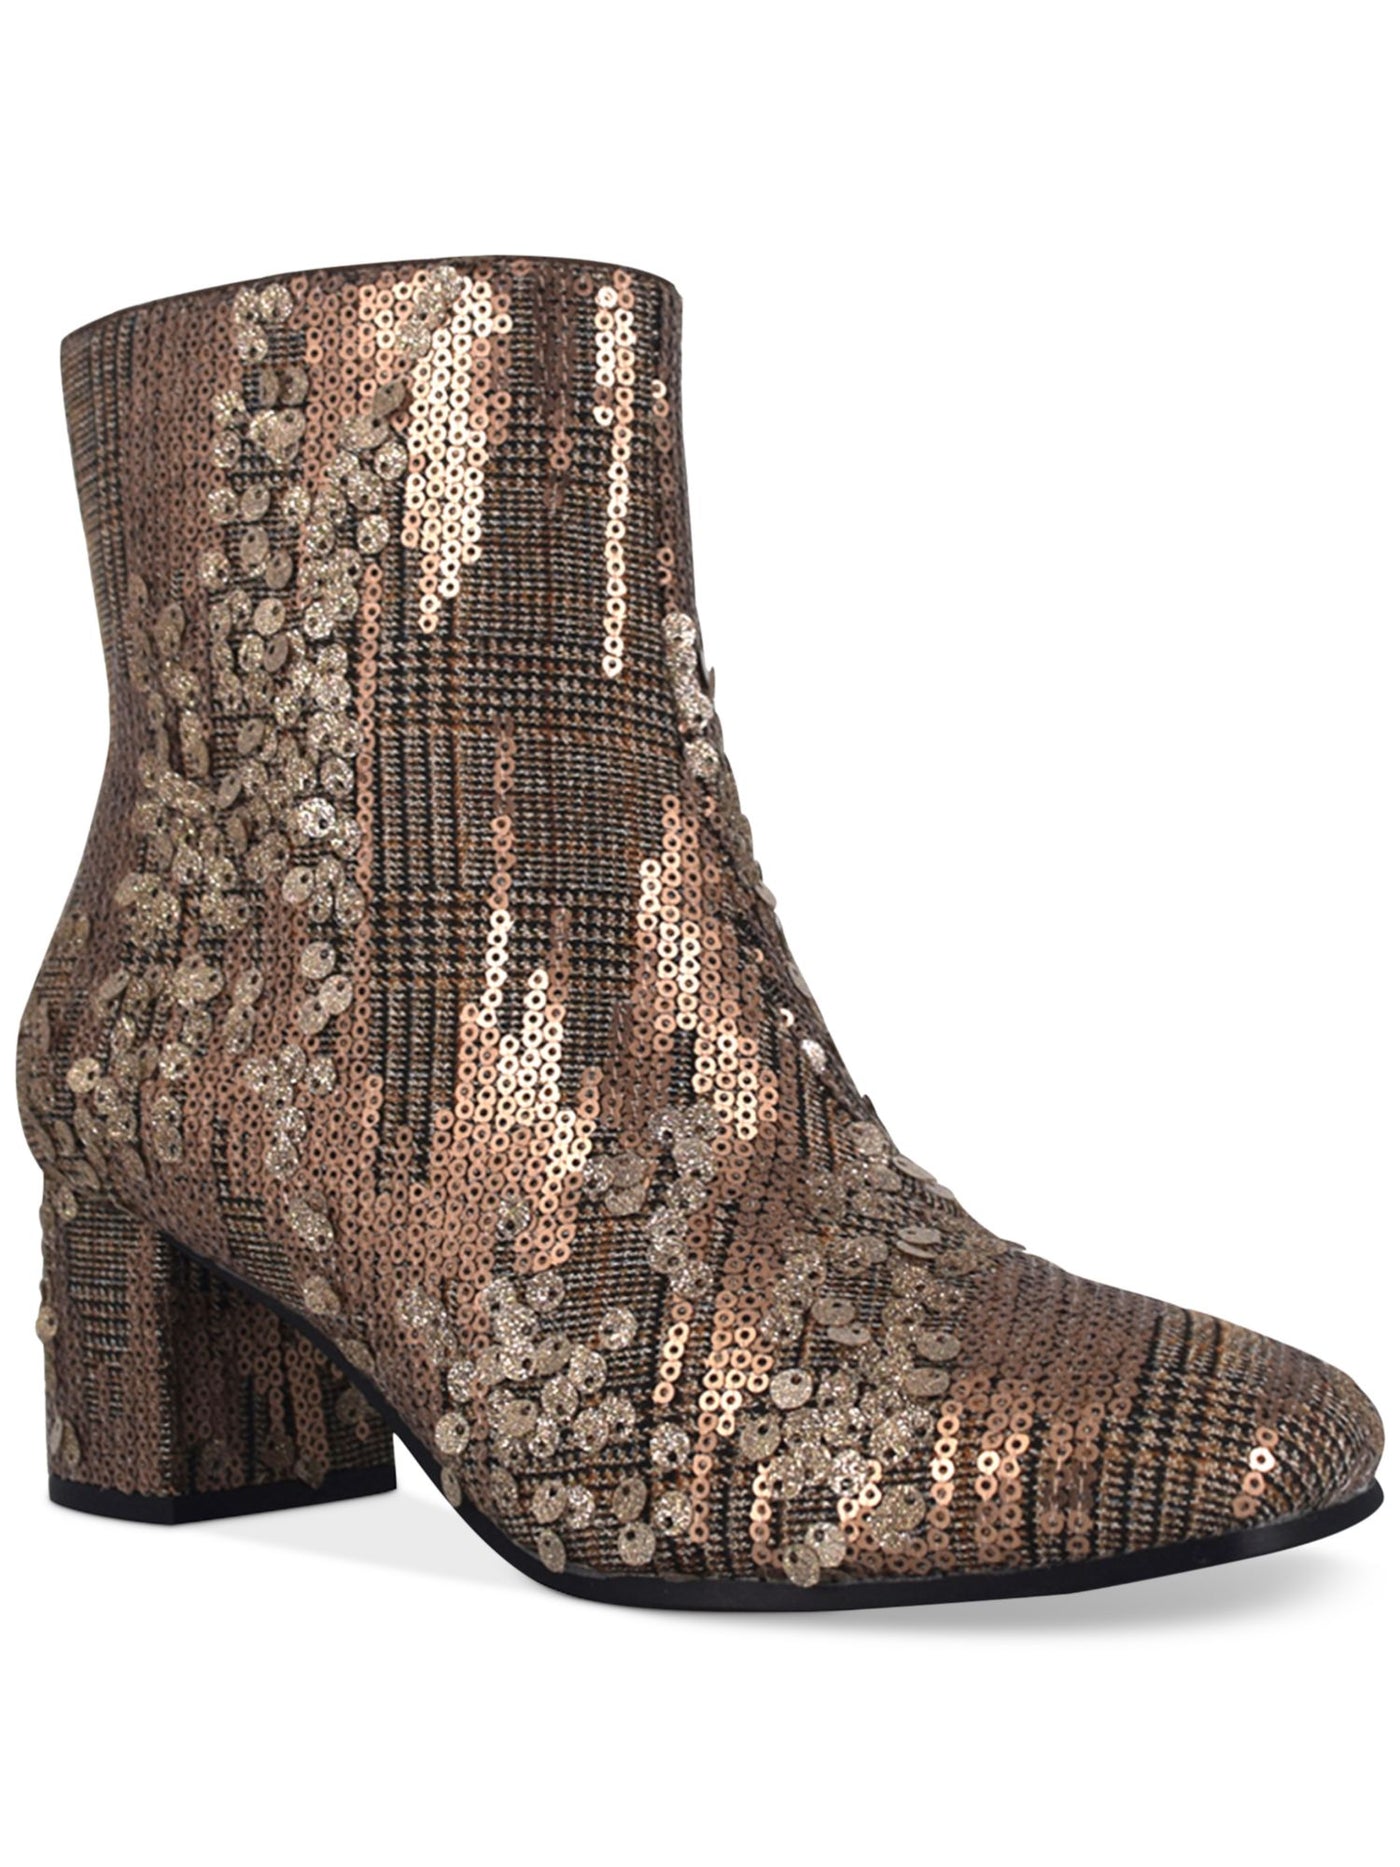 IMPO Womens Brown Sequined Cushioned Round Toe Block Heel Zip-Up Dress Booties 9 M